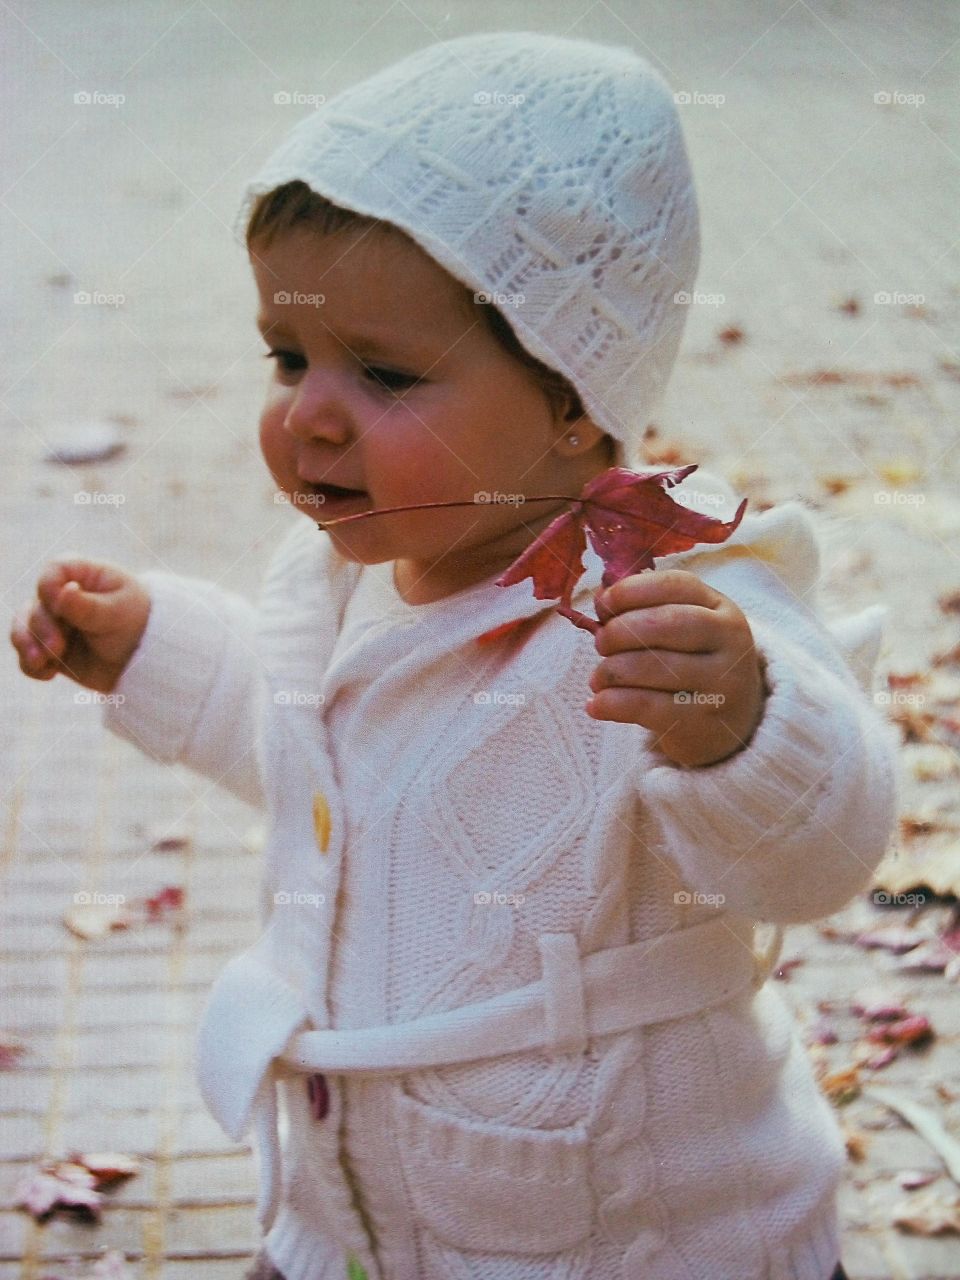 Baby in white warm clothing holding autumn leaf